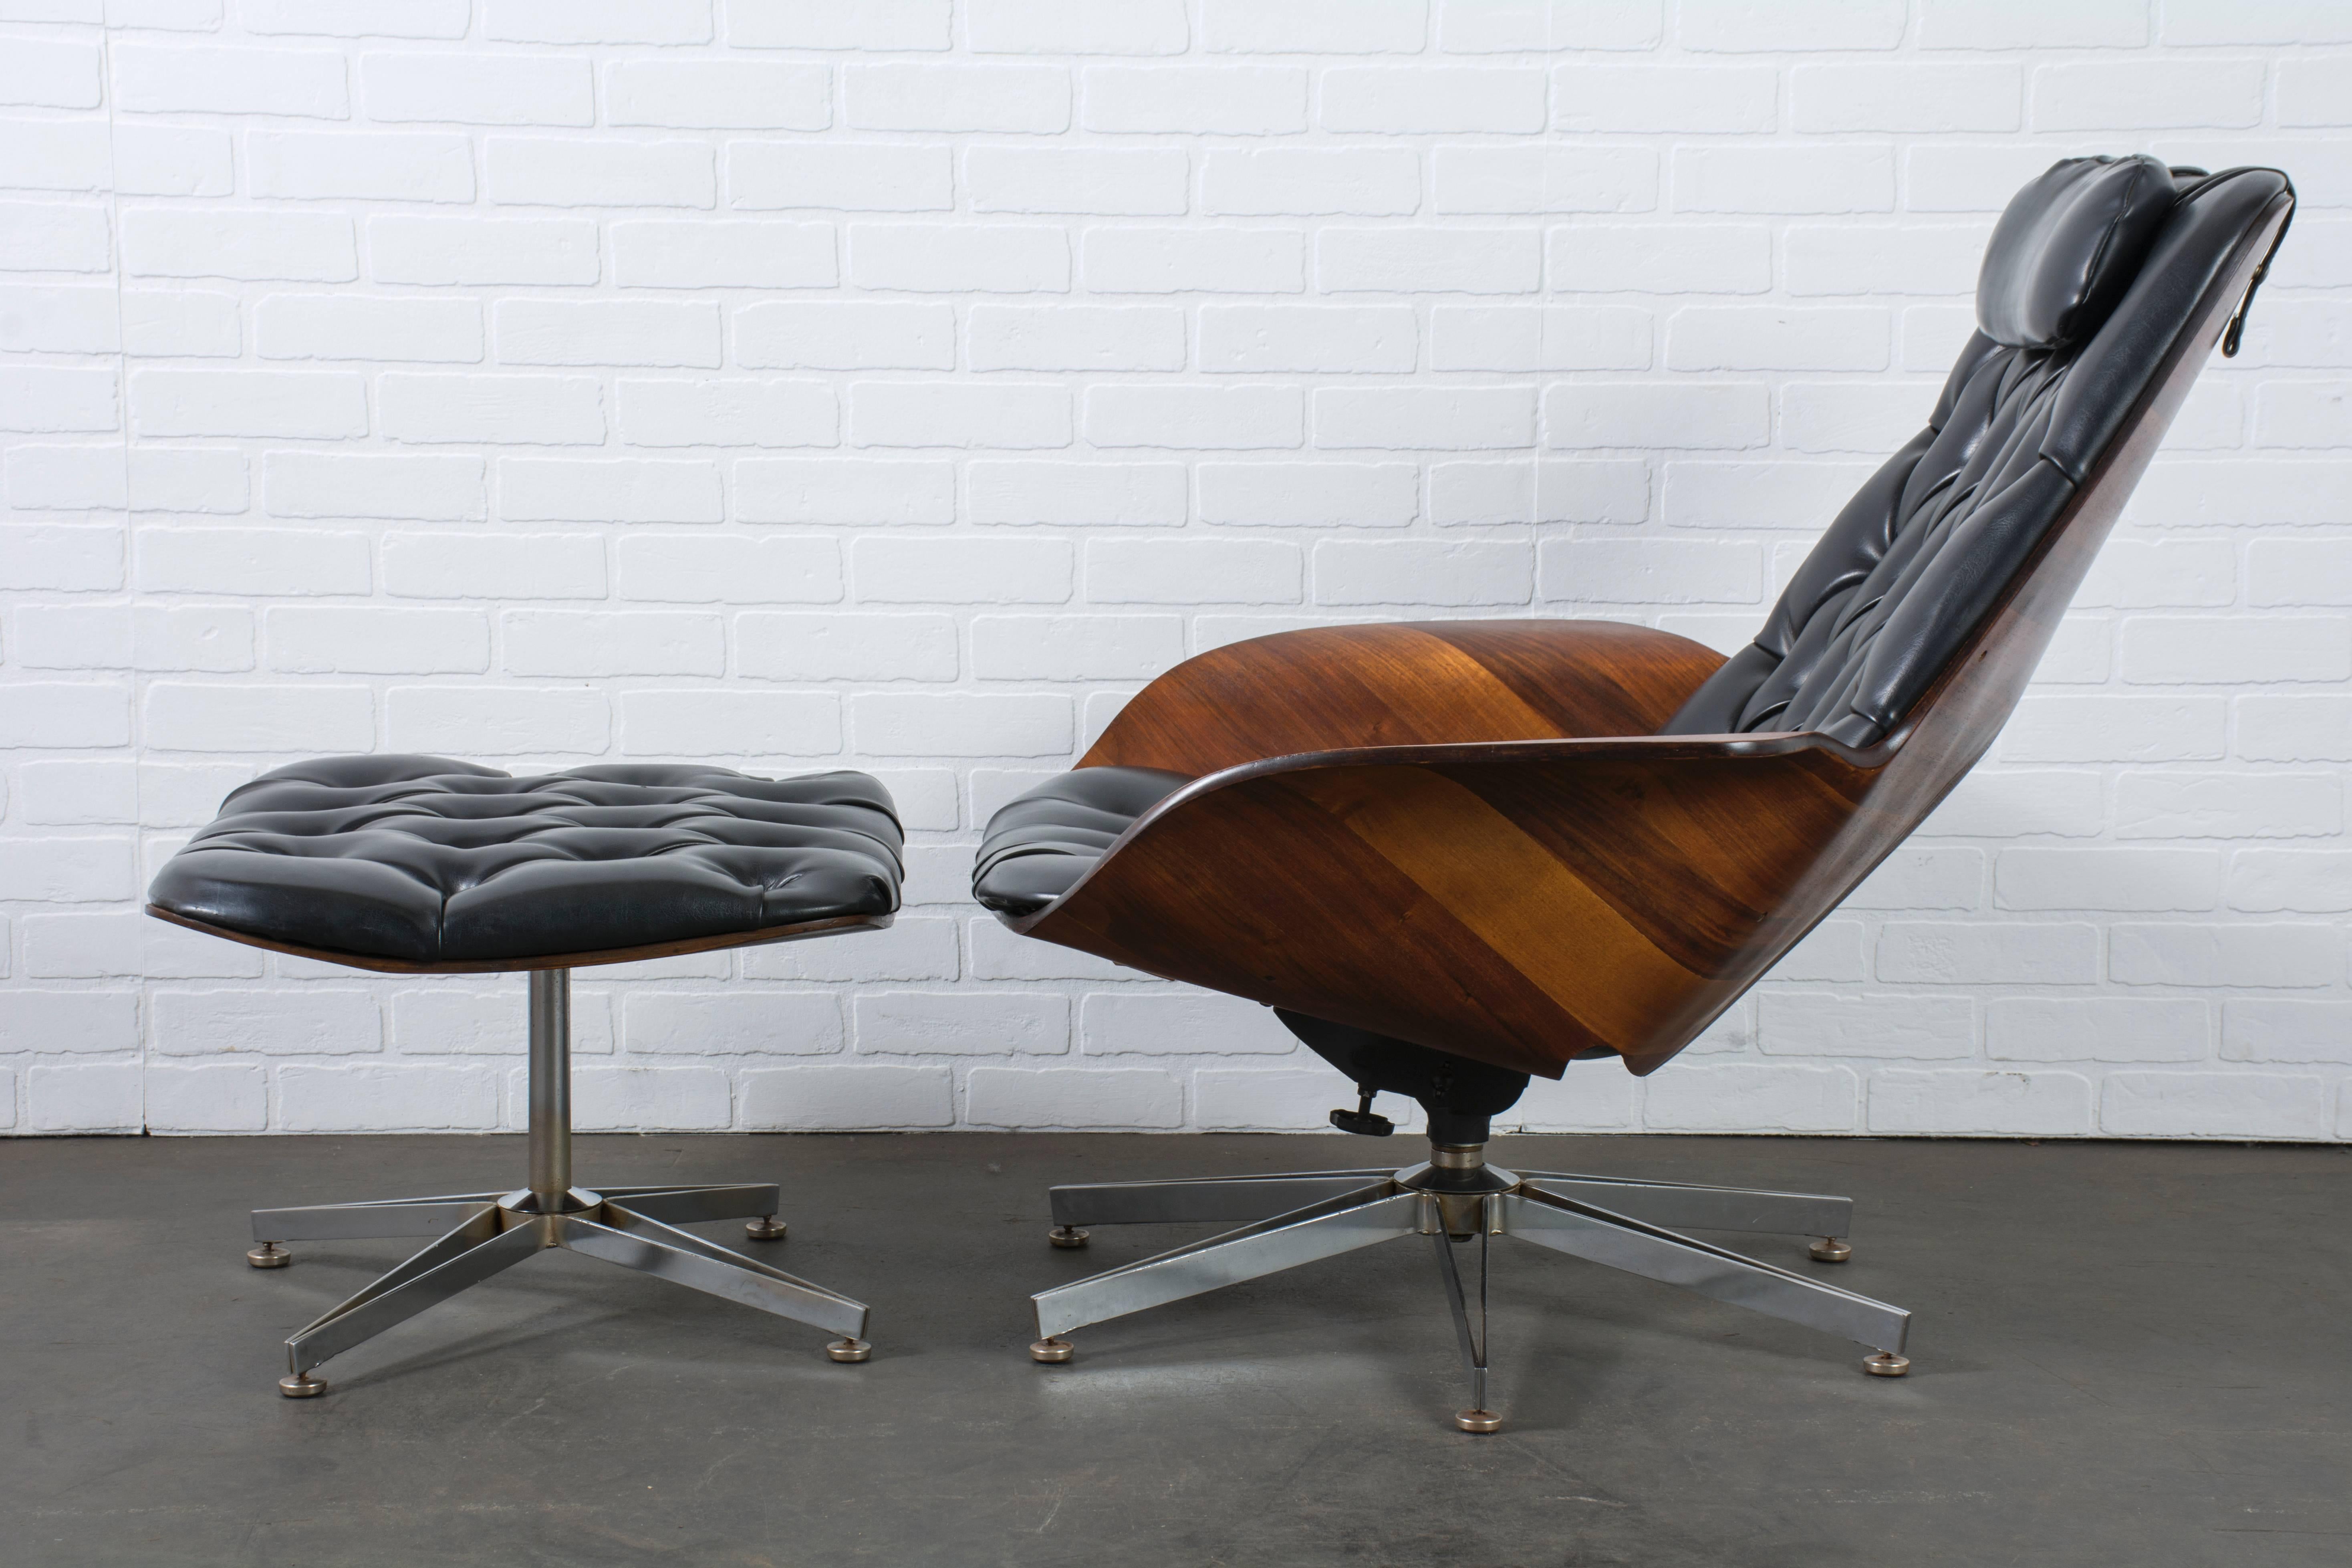 This Mid-Century Modern lounge chair and ottoman was designed by George Mulhauser for Plycraft in the 1950s. It features a molded plywood shell, the original tufted black Naugahyde upholstery, and a rare stainless steel 'star' base. This chair